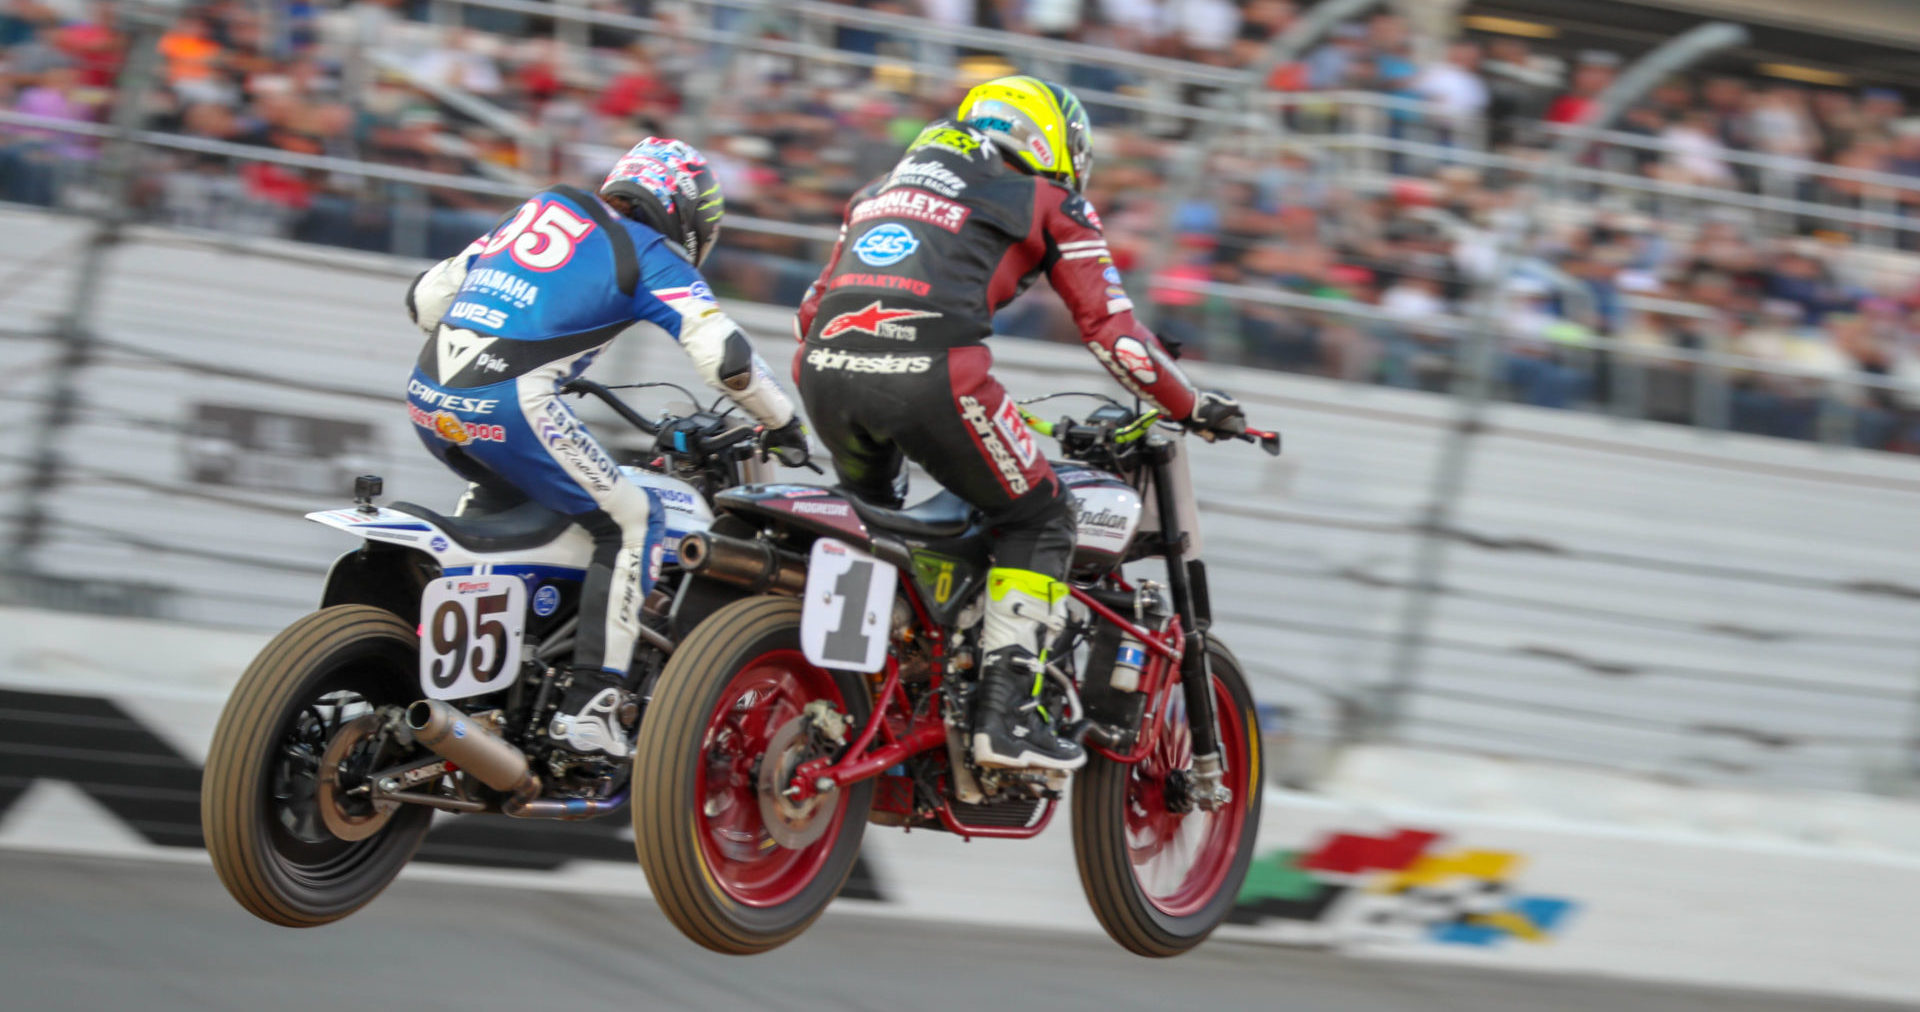 JD Beach (95) and Jared Mees (1) during the 2019 Daytona TT. Photo by Scott Hunter, courtesy of AFT.